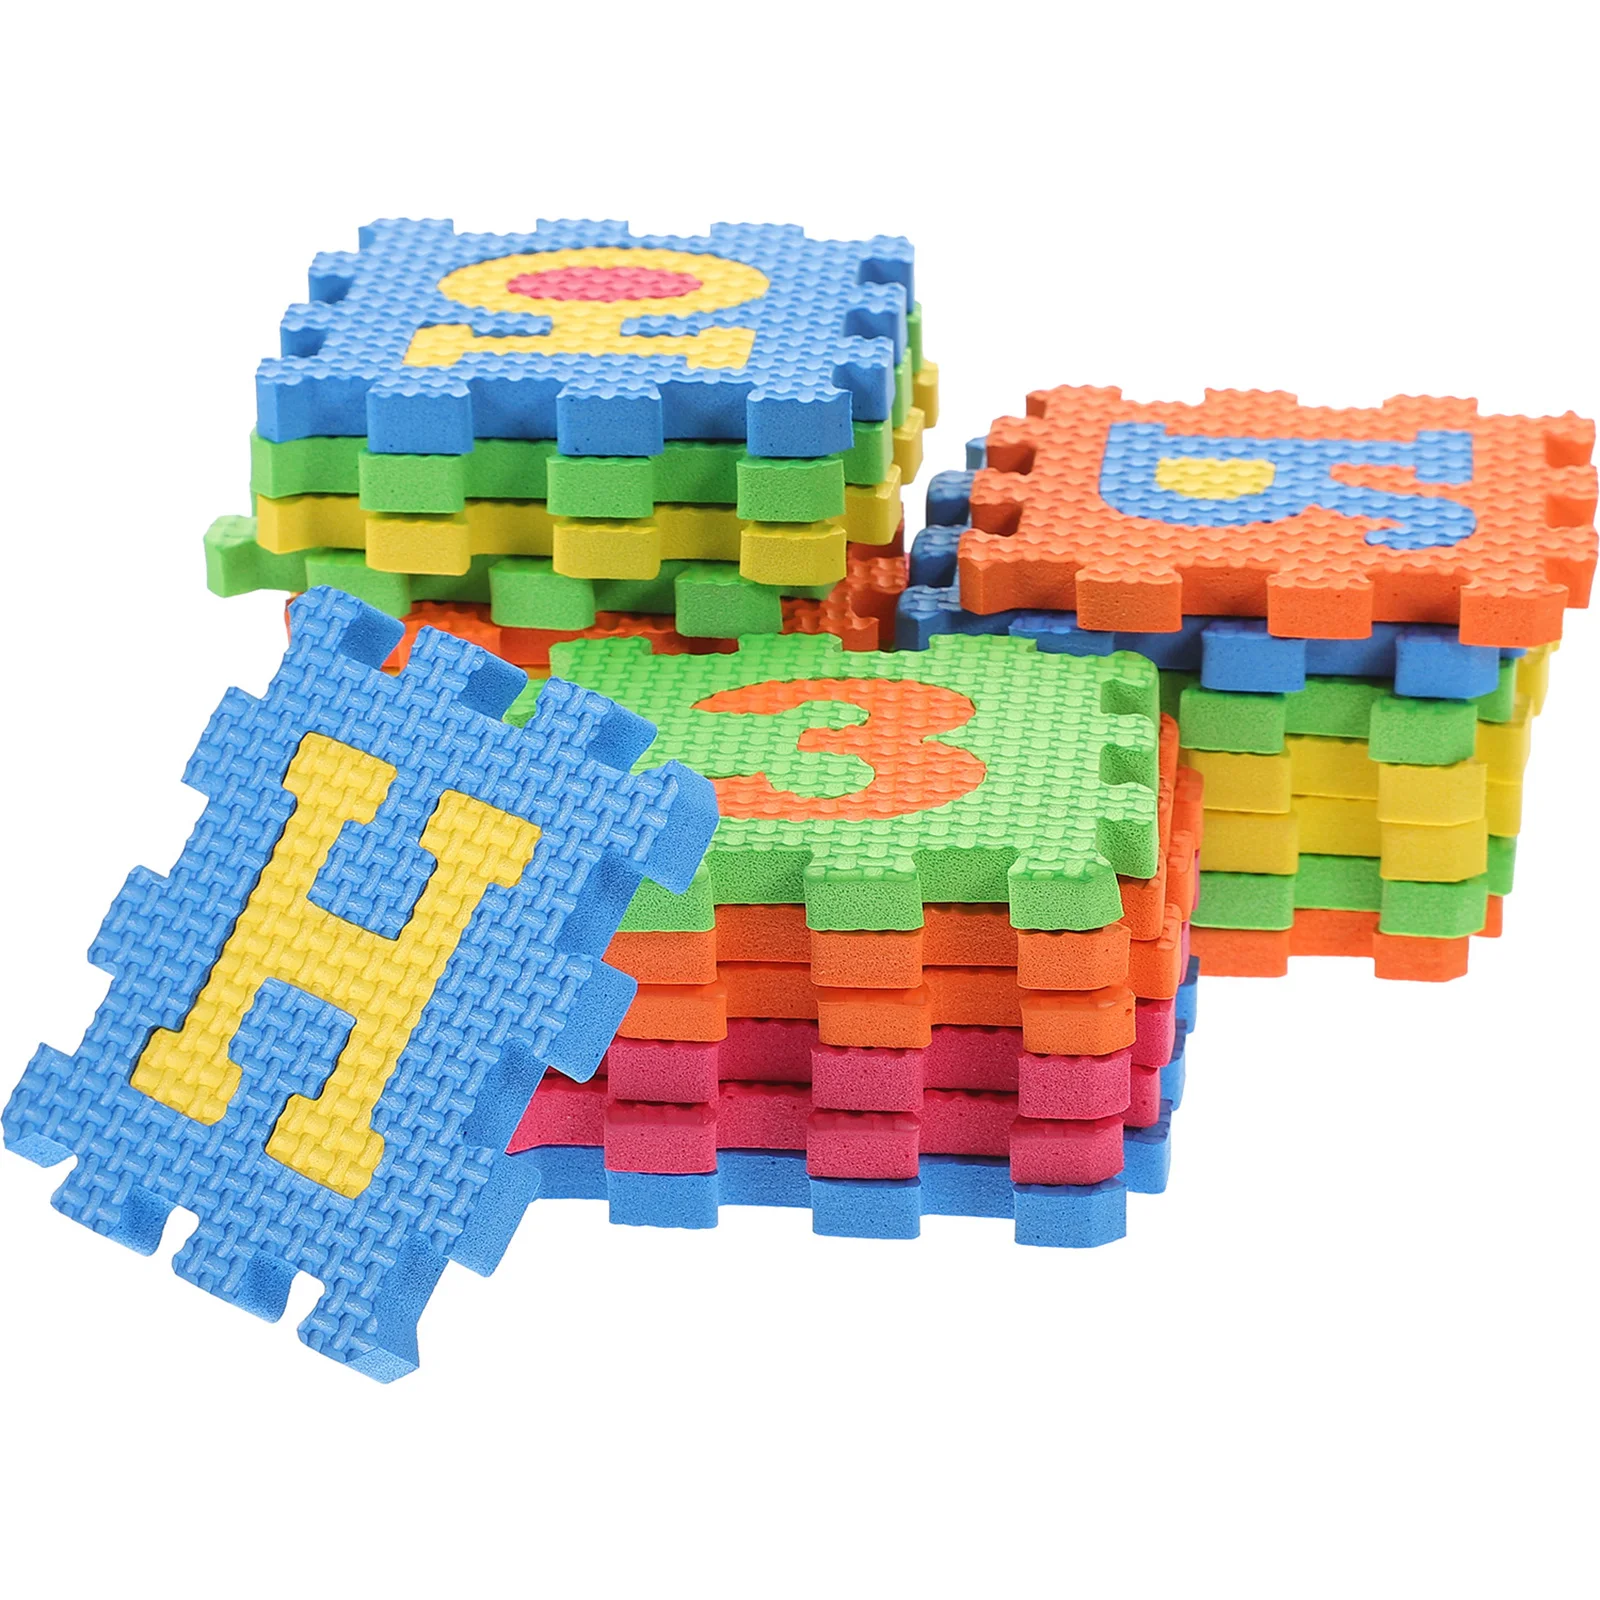 Arabic Russian Alphabet Letter Floor Mat Puzzle Crawling Infant Floor Mat Children'S Toy Pad EVA Puzzle Foam Game Pad 36pcs abc flashcards baby child number alphabet puzzle foam mats educational toy gift whole pack foam mat toy